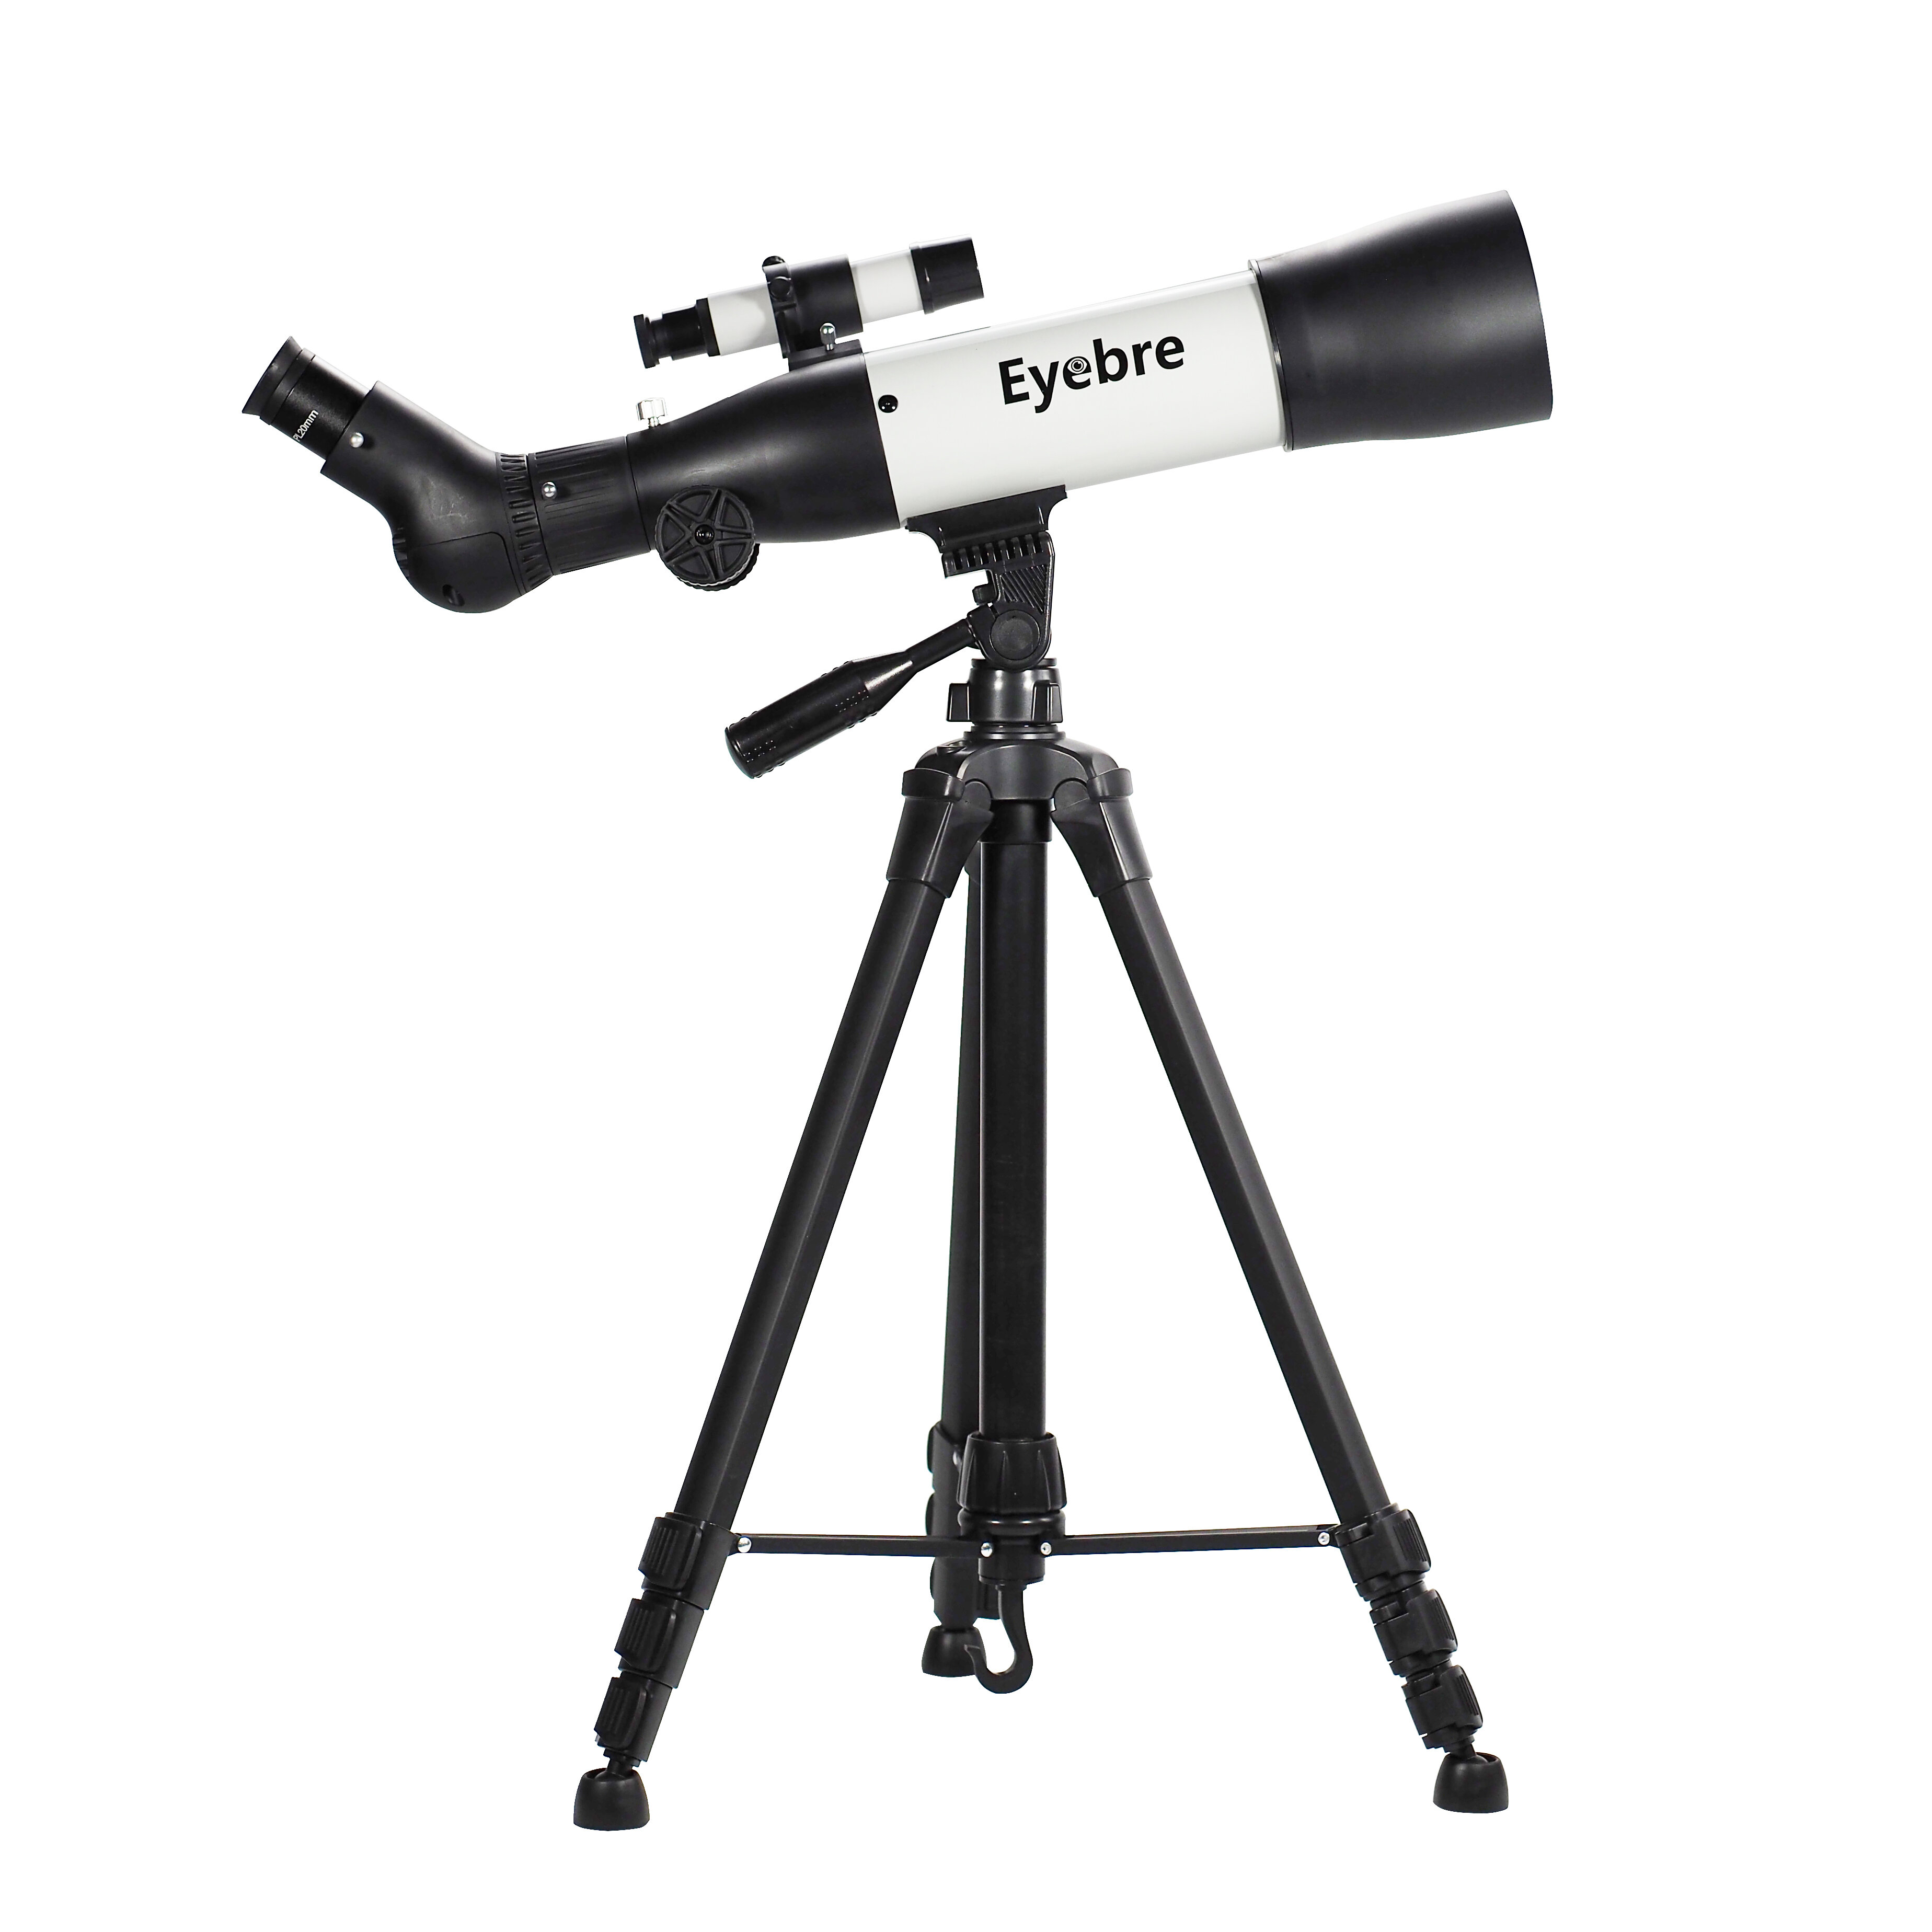 

Eyebre HD 350X Astronomical Telescope High Magnification Professional Night Vision Deep Space Star View Moon Bird Watchi